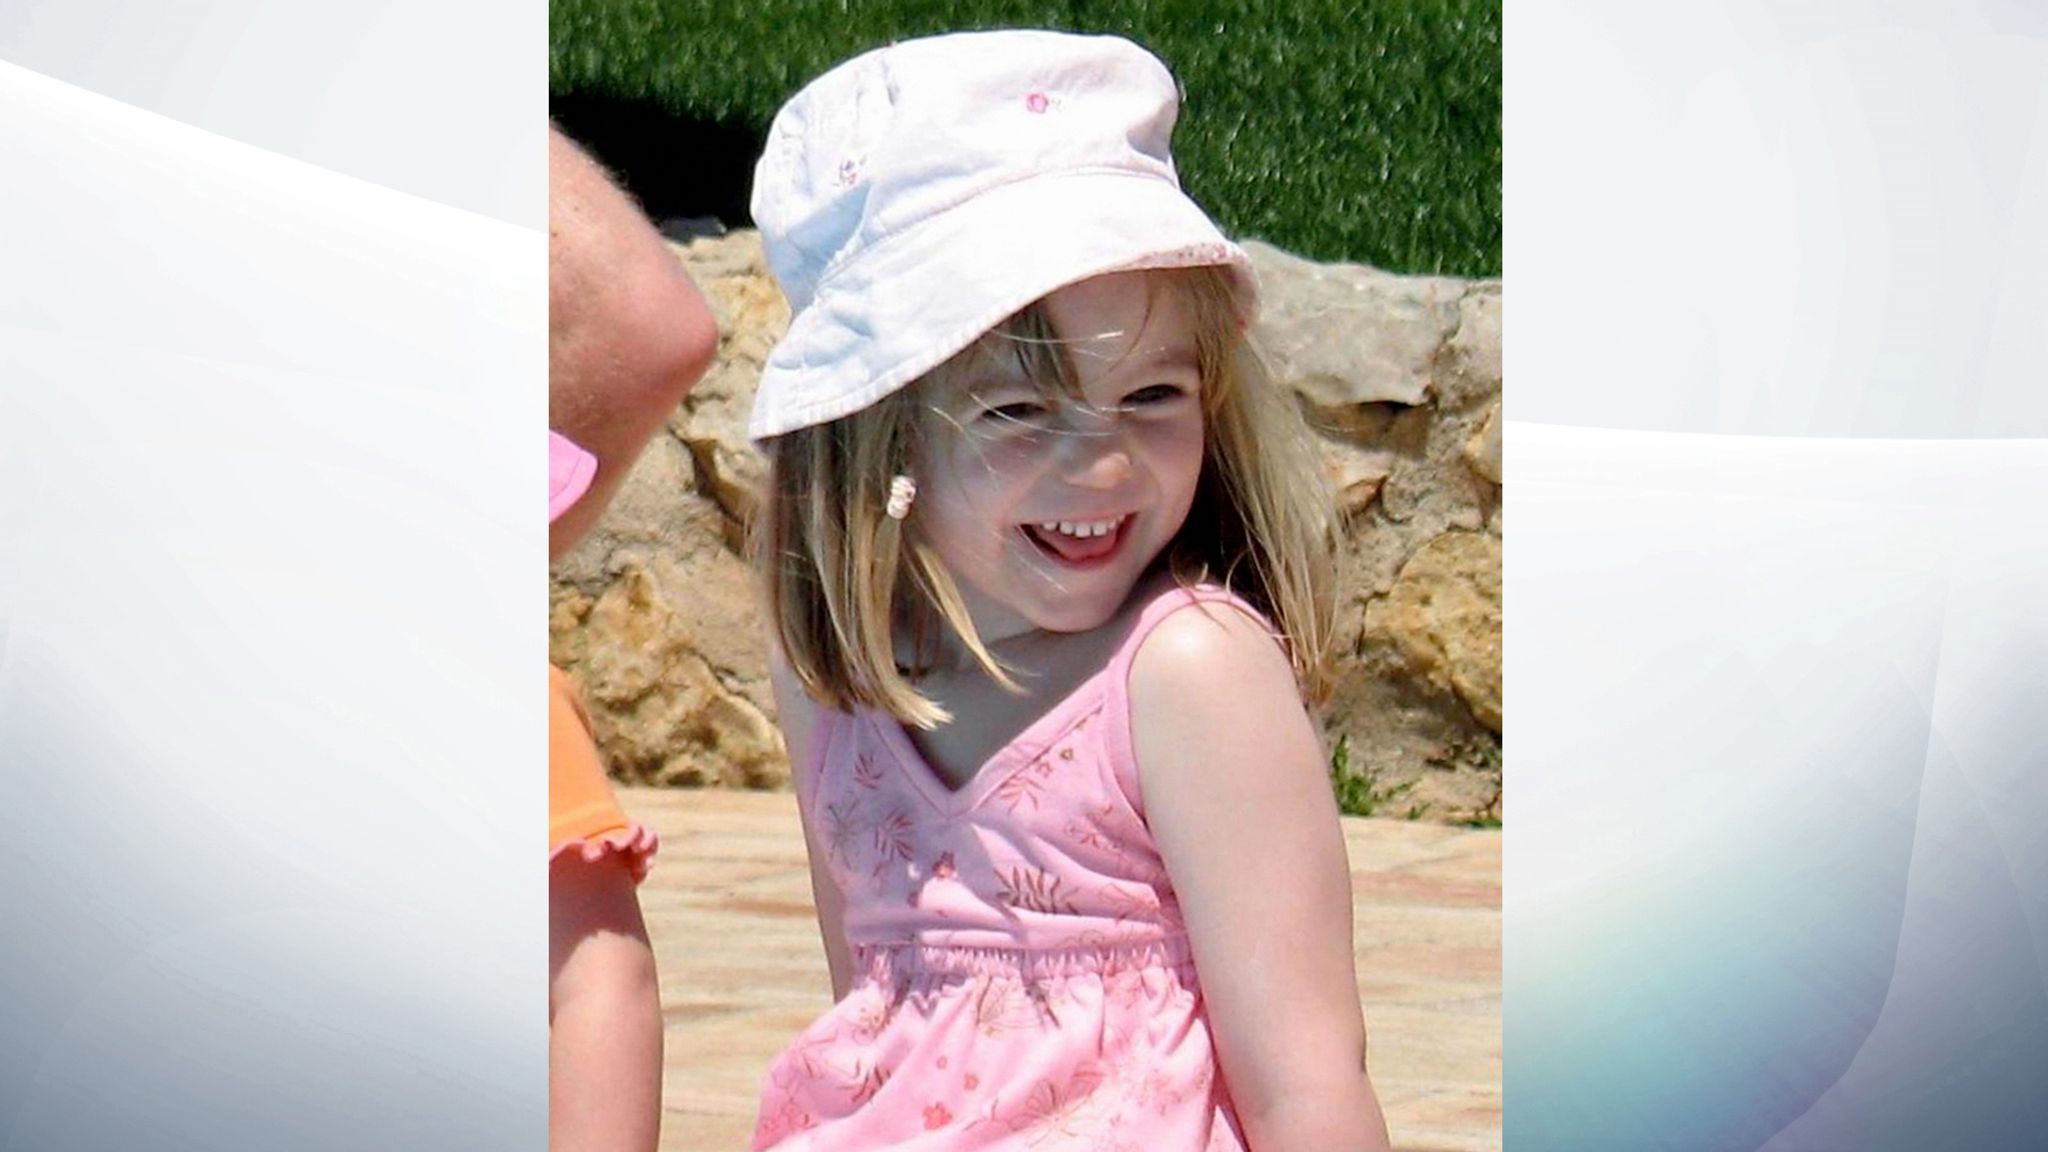 What happened to Madeleine McCann? Six possible theories examined | UK